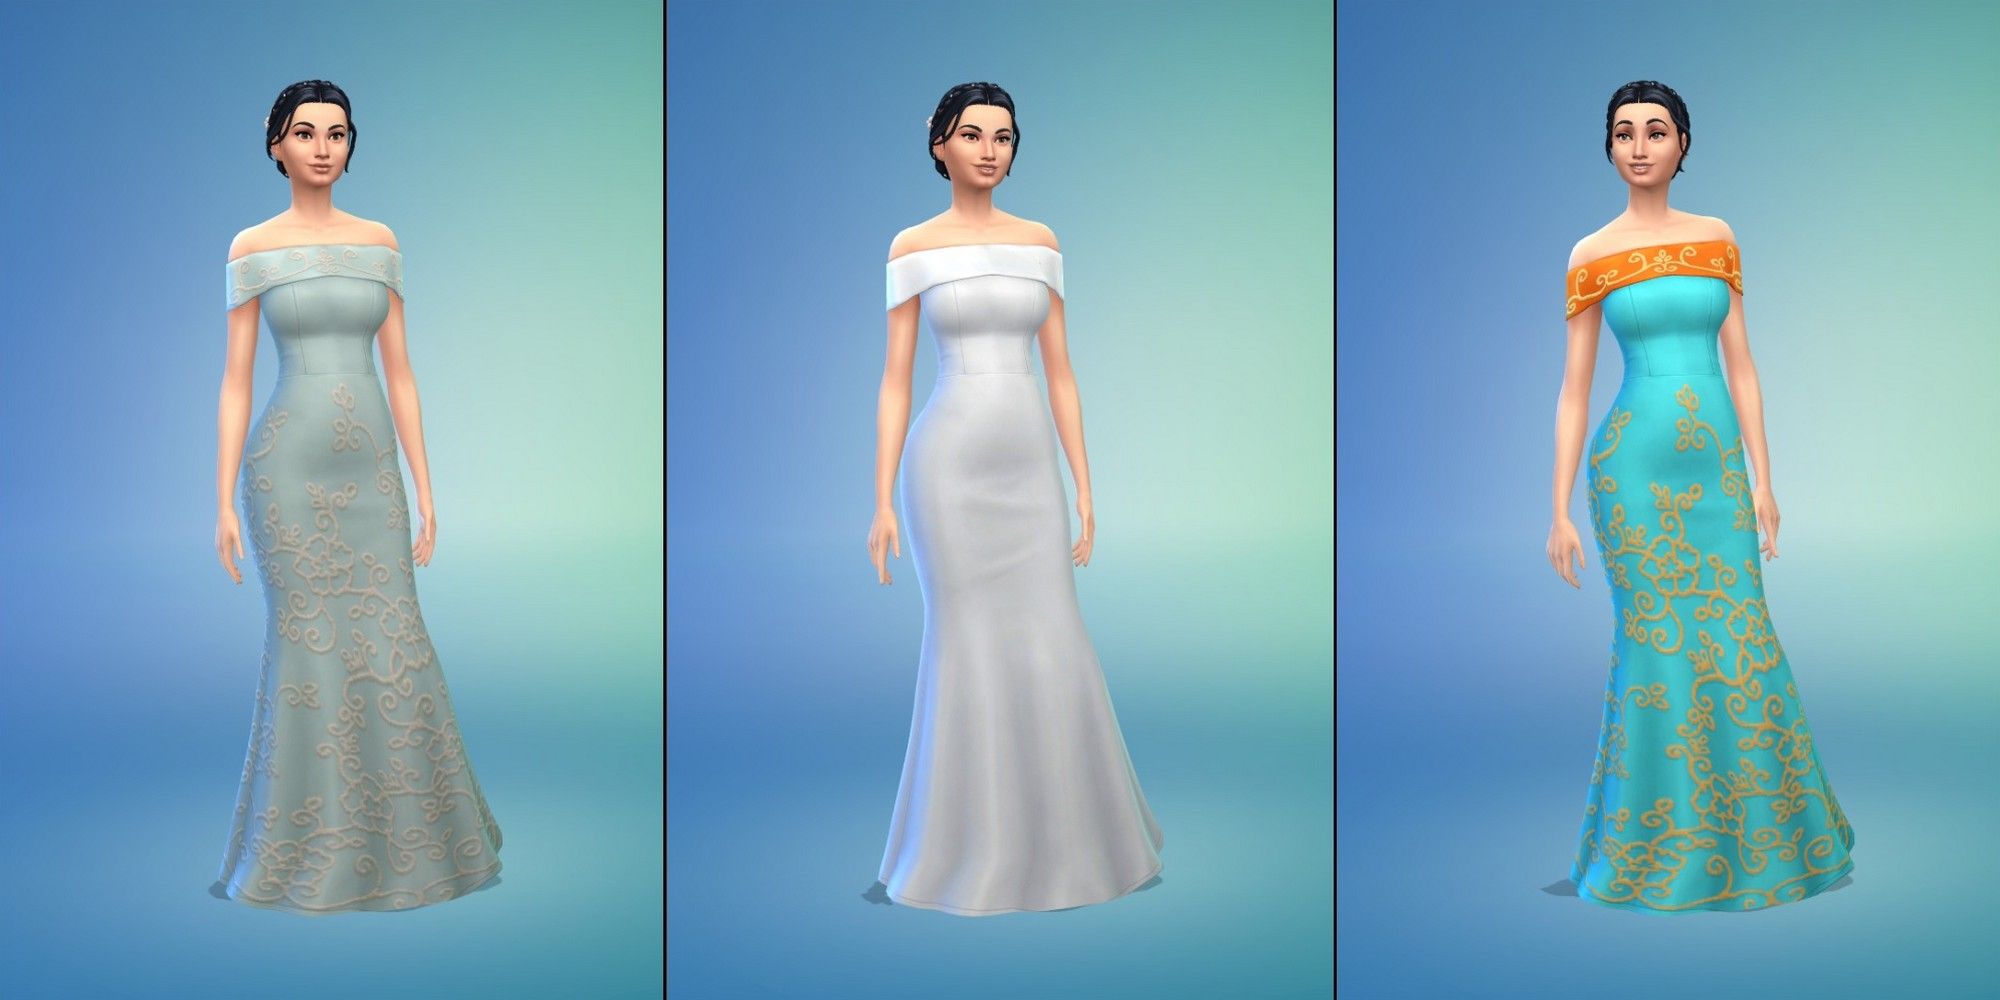 Sims 4 Wedding Dress Off The Shoulder Flare